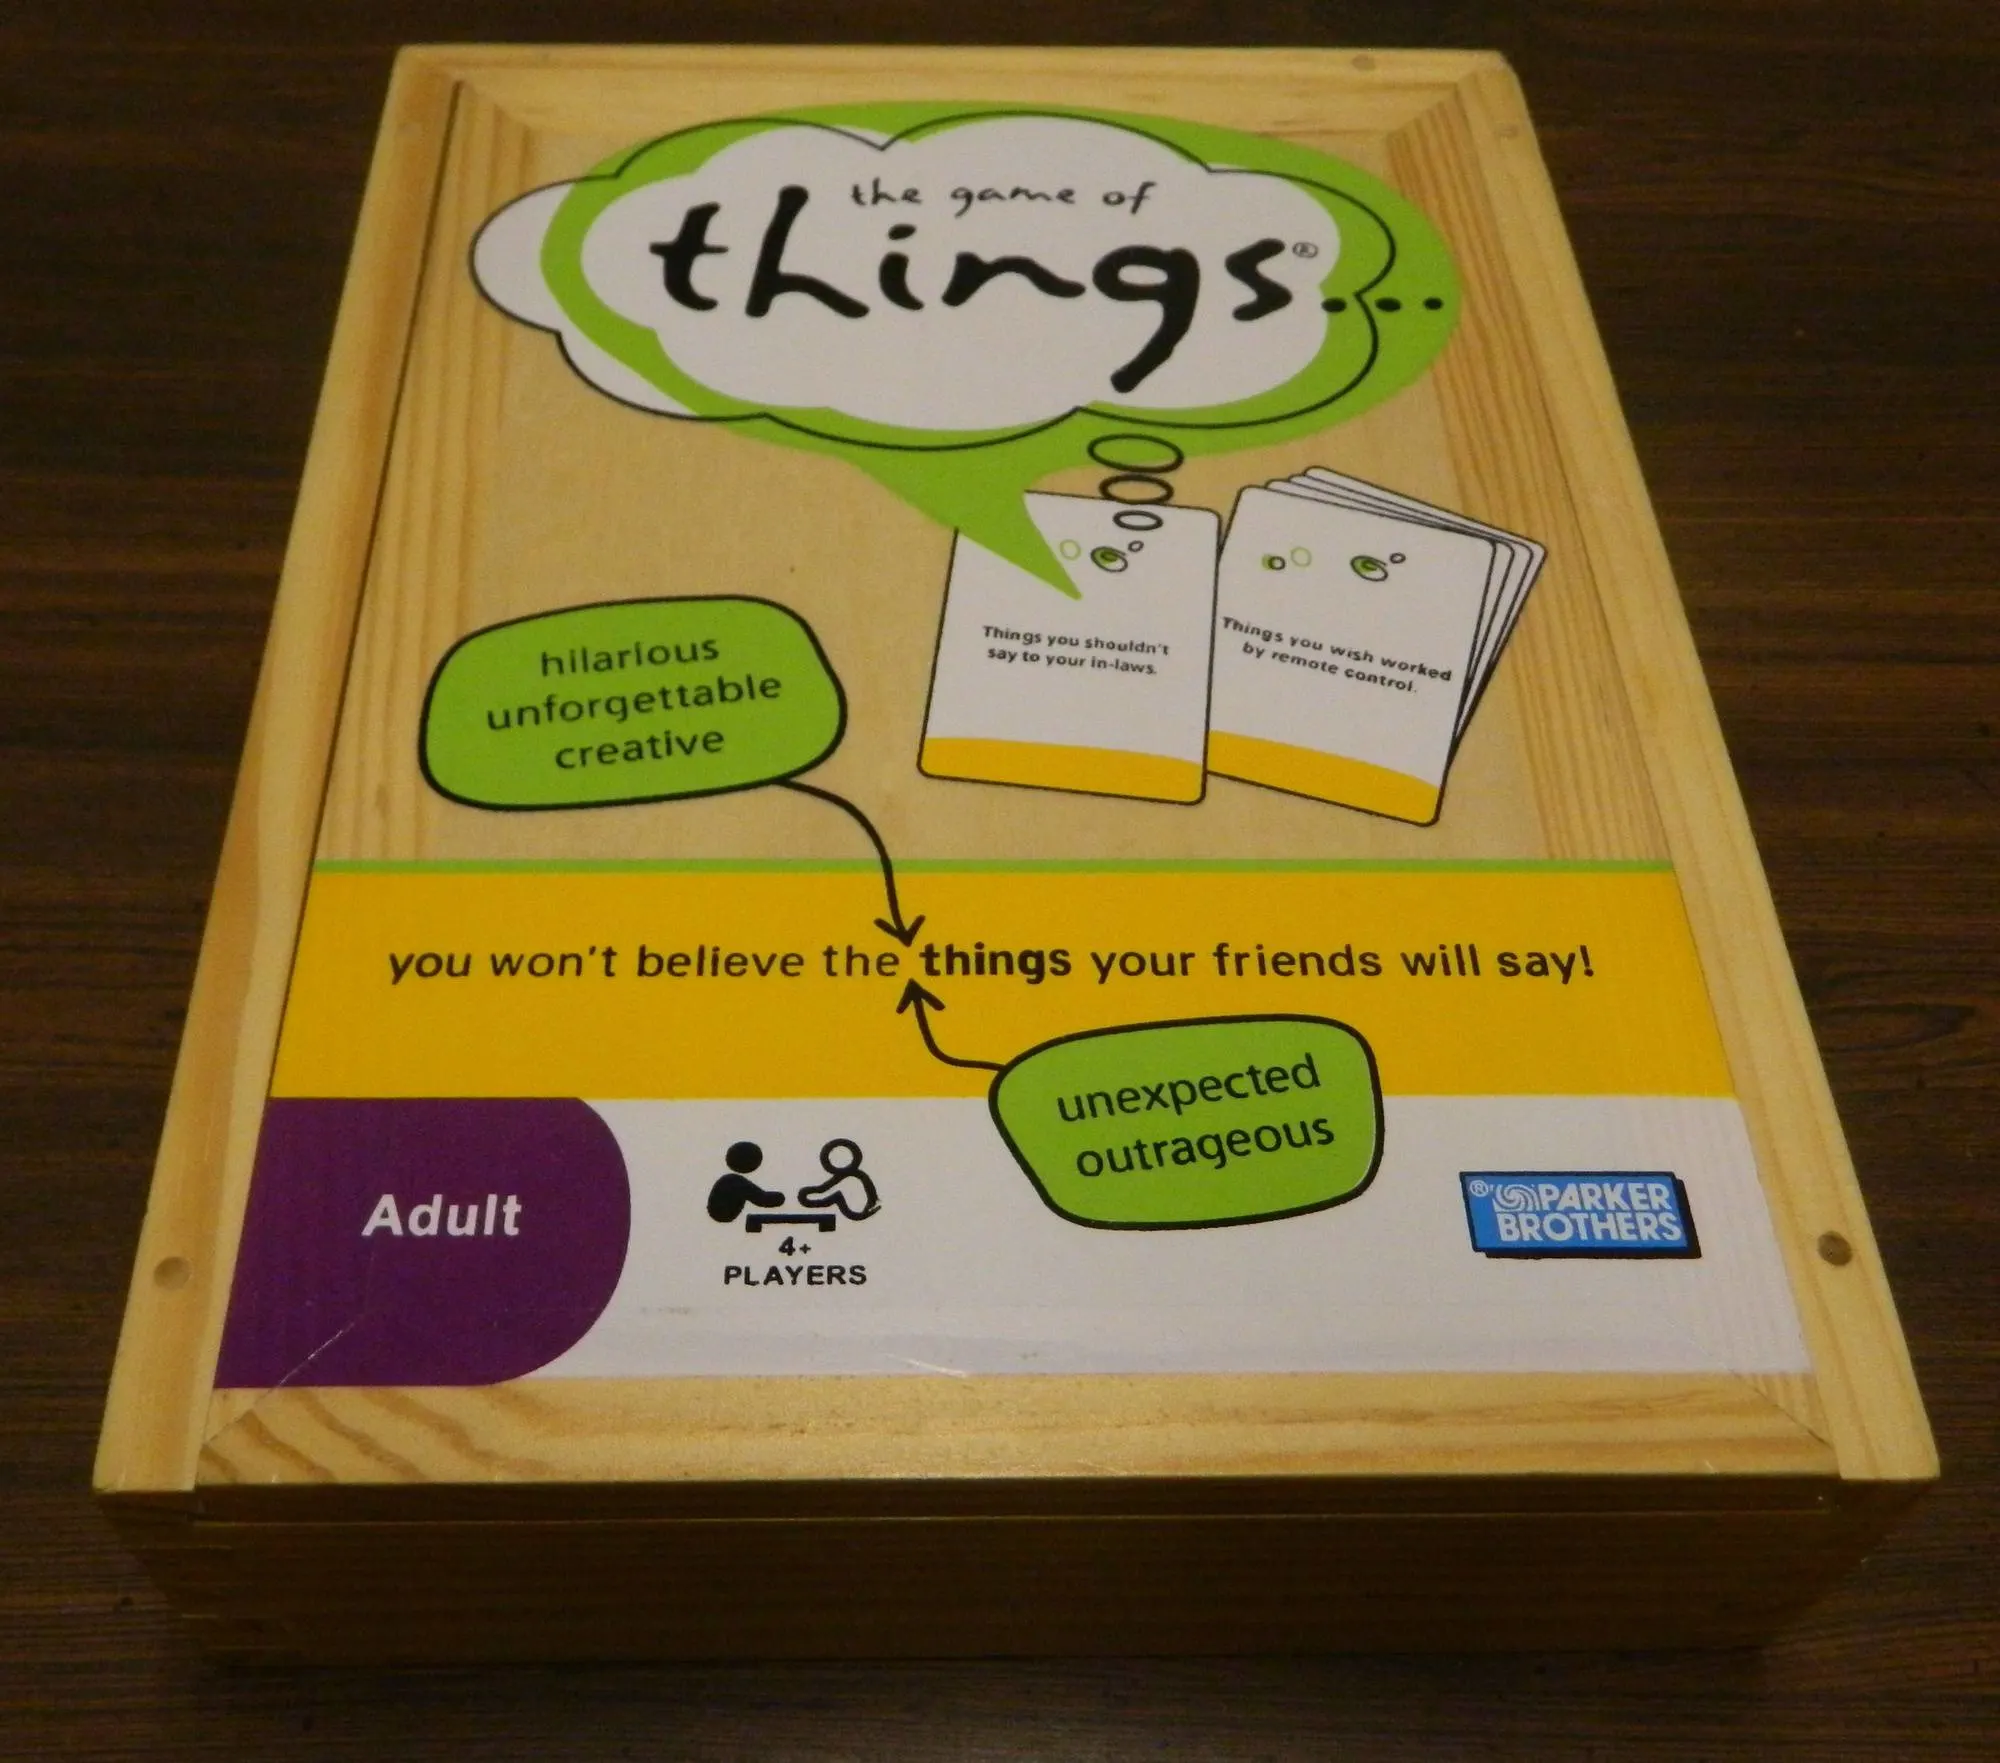 Box for The Game of Things